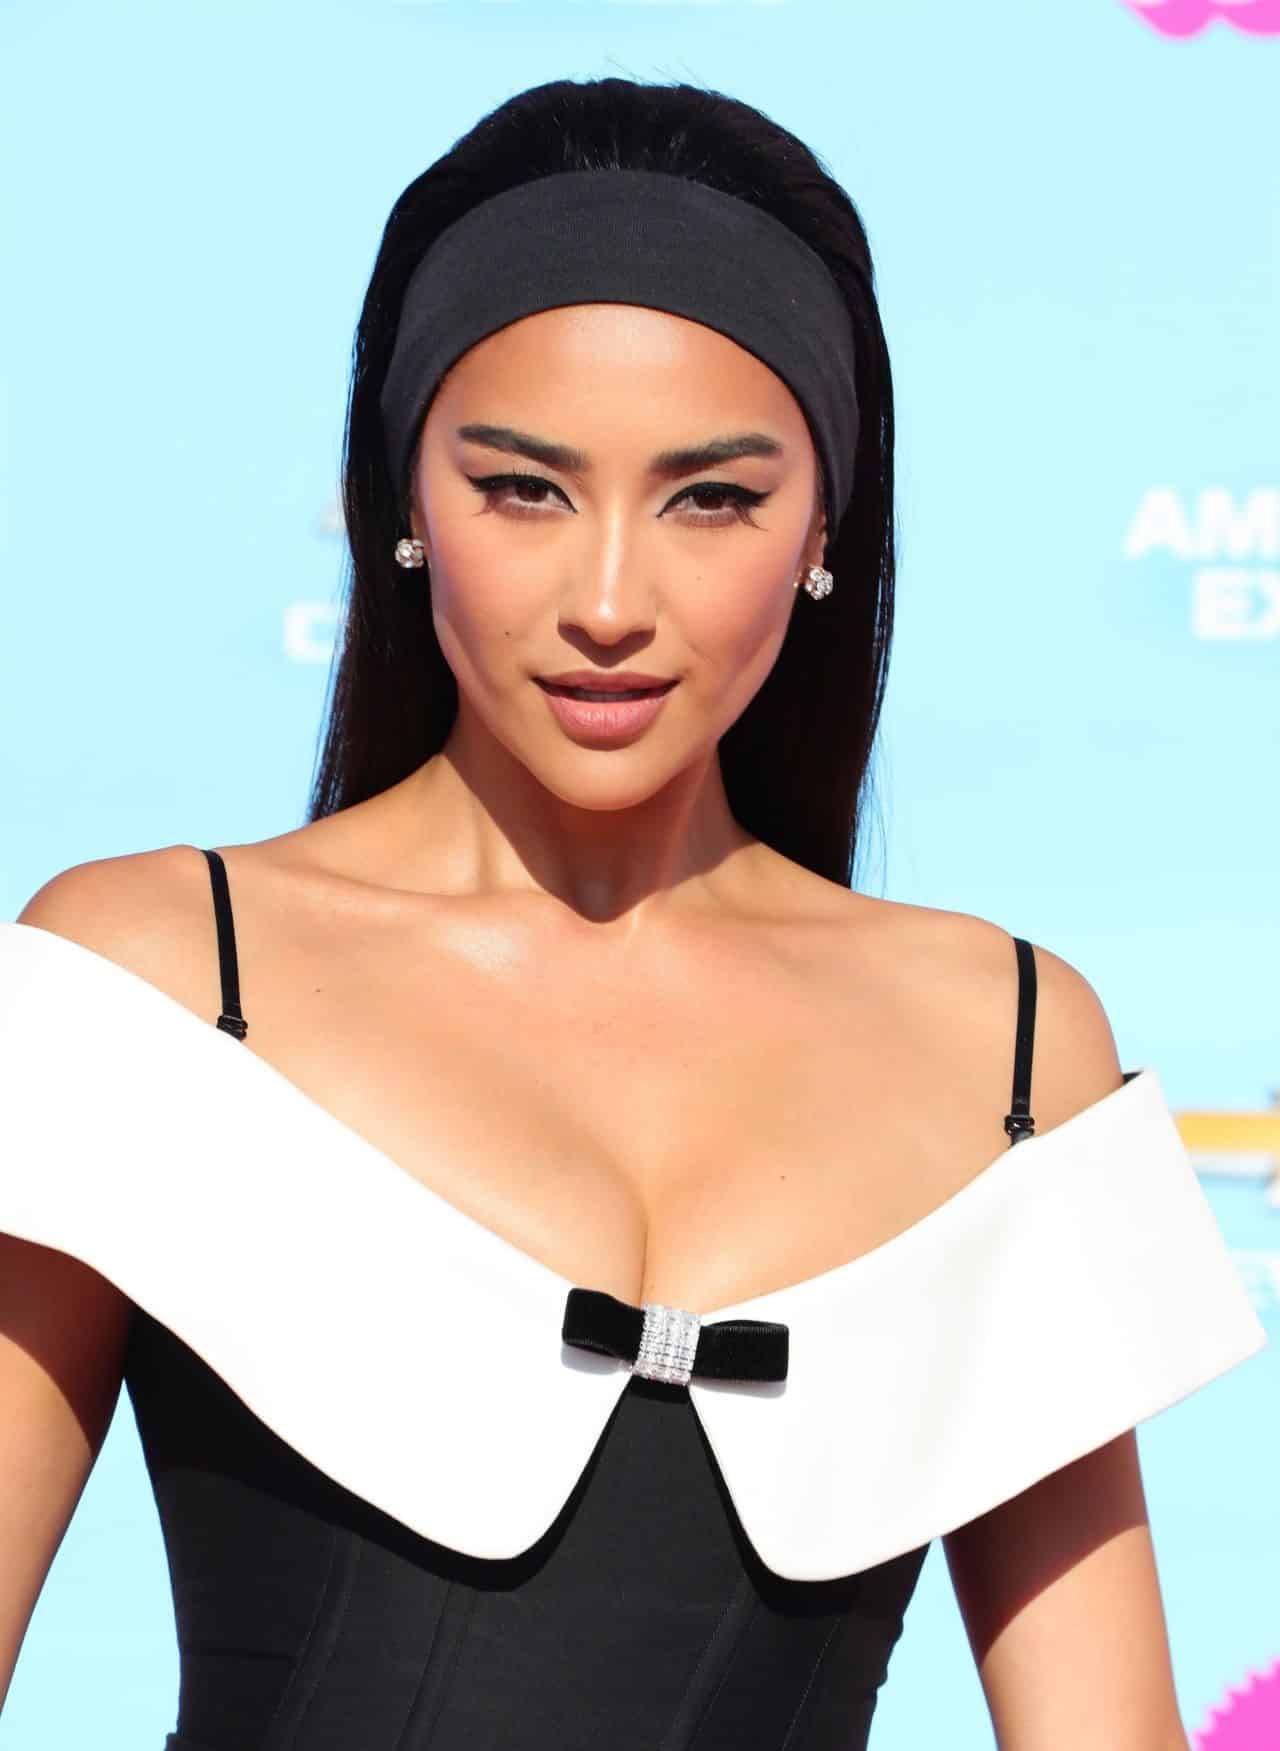 Shay Mitchell Flatters Her Figure in Shushu/Tong Dress at "Barbie" Premiere